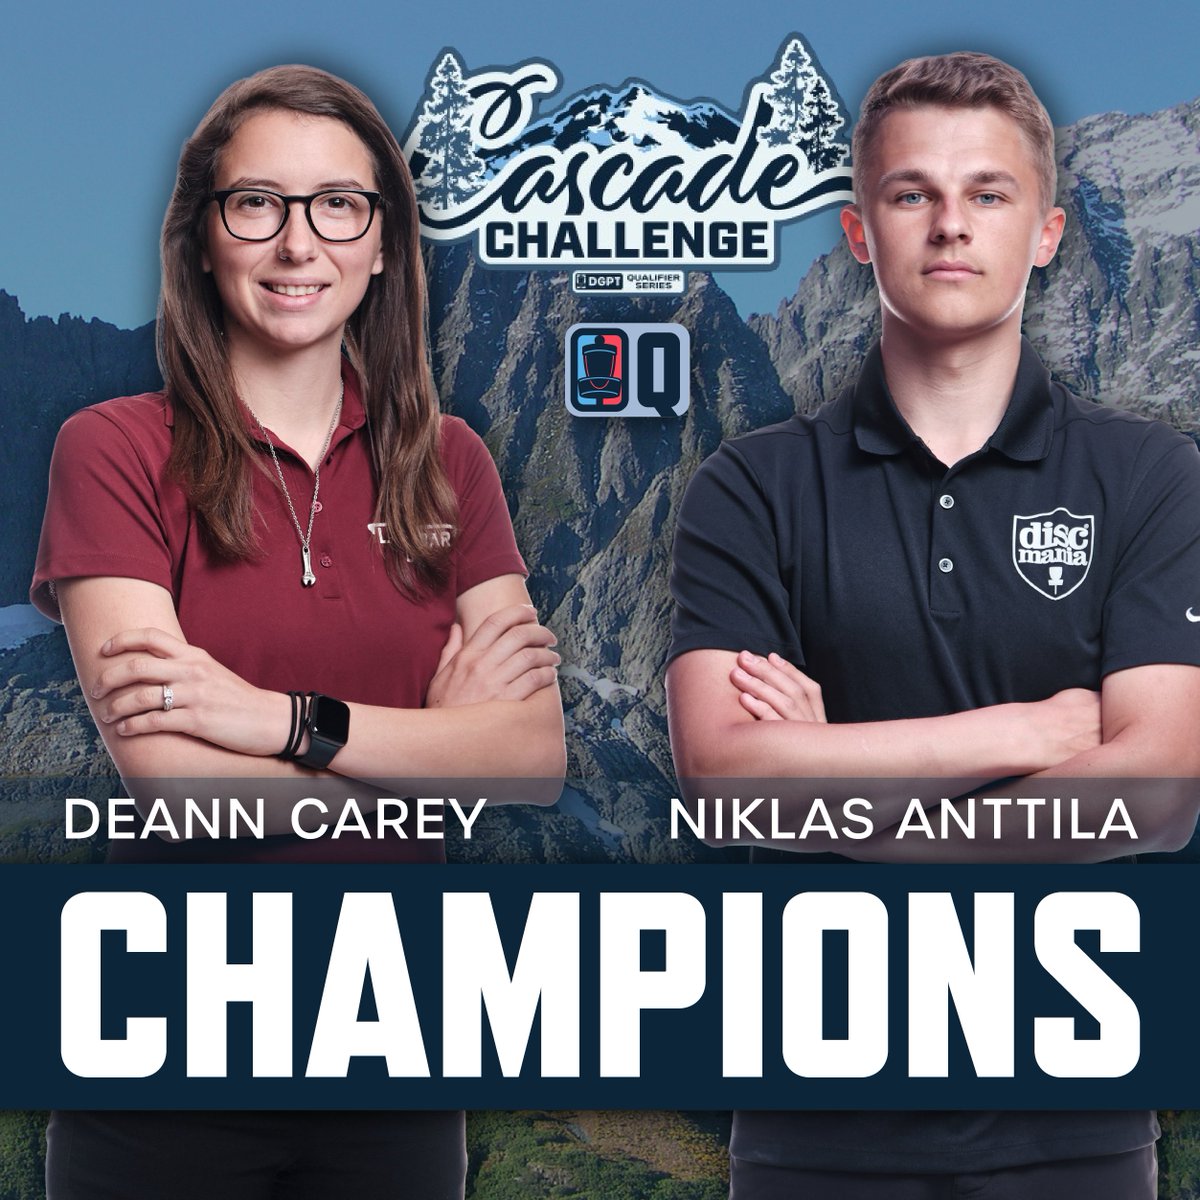 Congratulations to Niklas Anttila and Deann Carey, winners of the 2024 @DiscraftDG Cascade Challenge! You can find more info on our Q-Series here: dgpt.com/q-series/